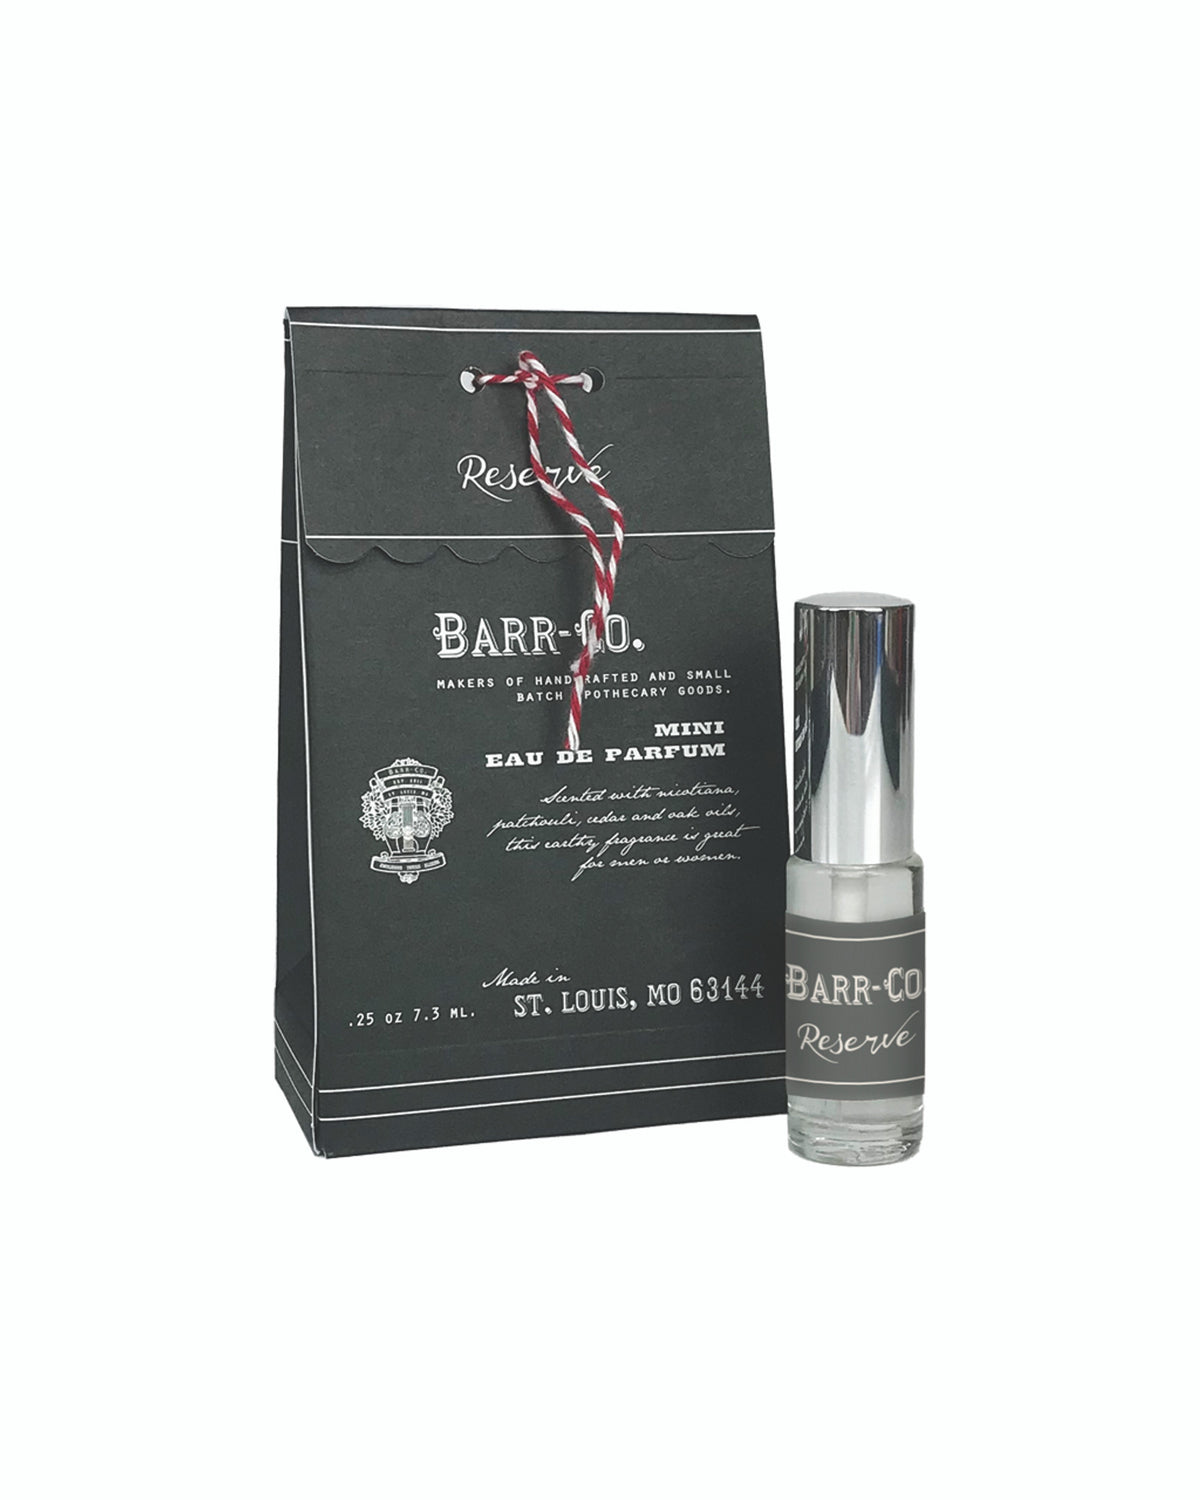 A bottle of Barr-Co. Reserve Mini-Perfume next to its black packaging bag, tied with a white and red twisted cord. The label includes brand and address details and the scent notes.